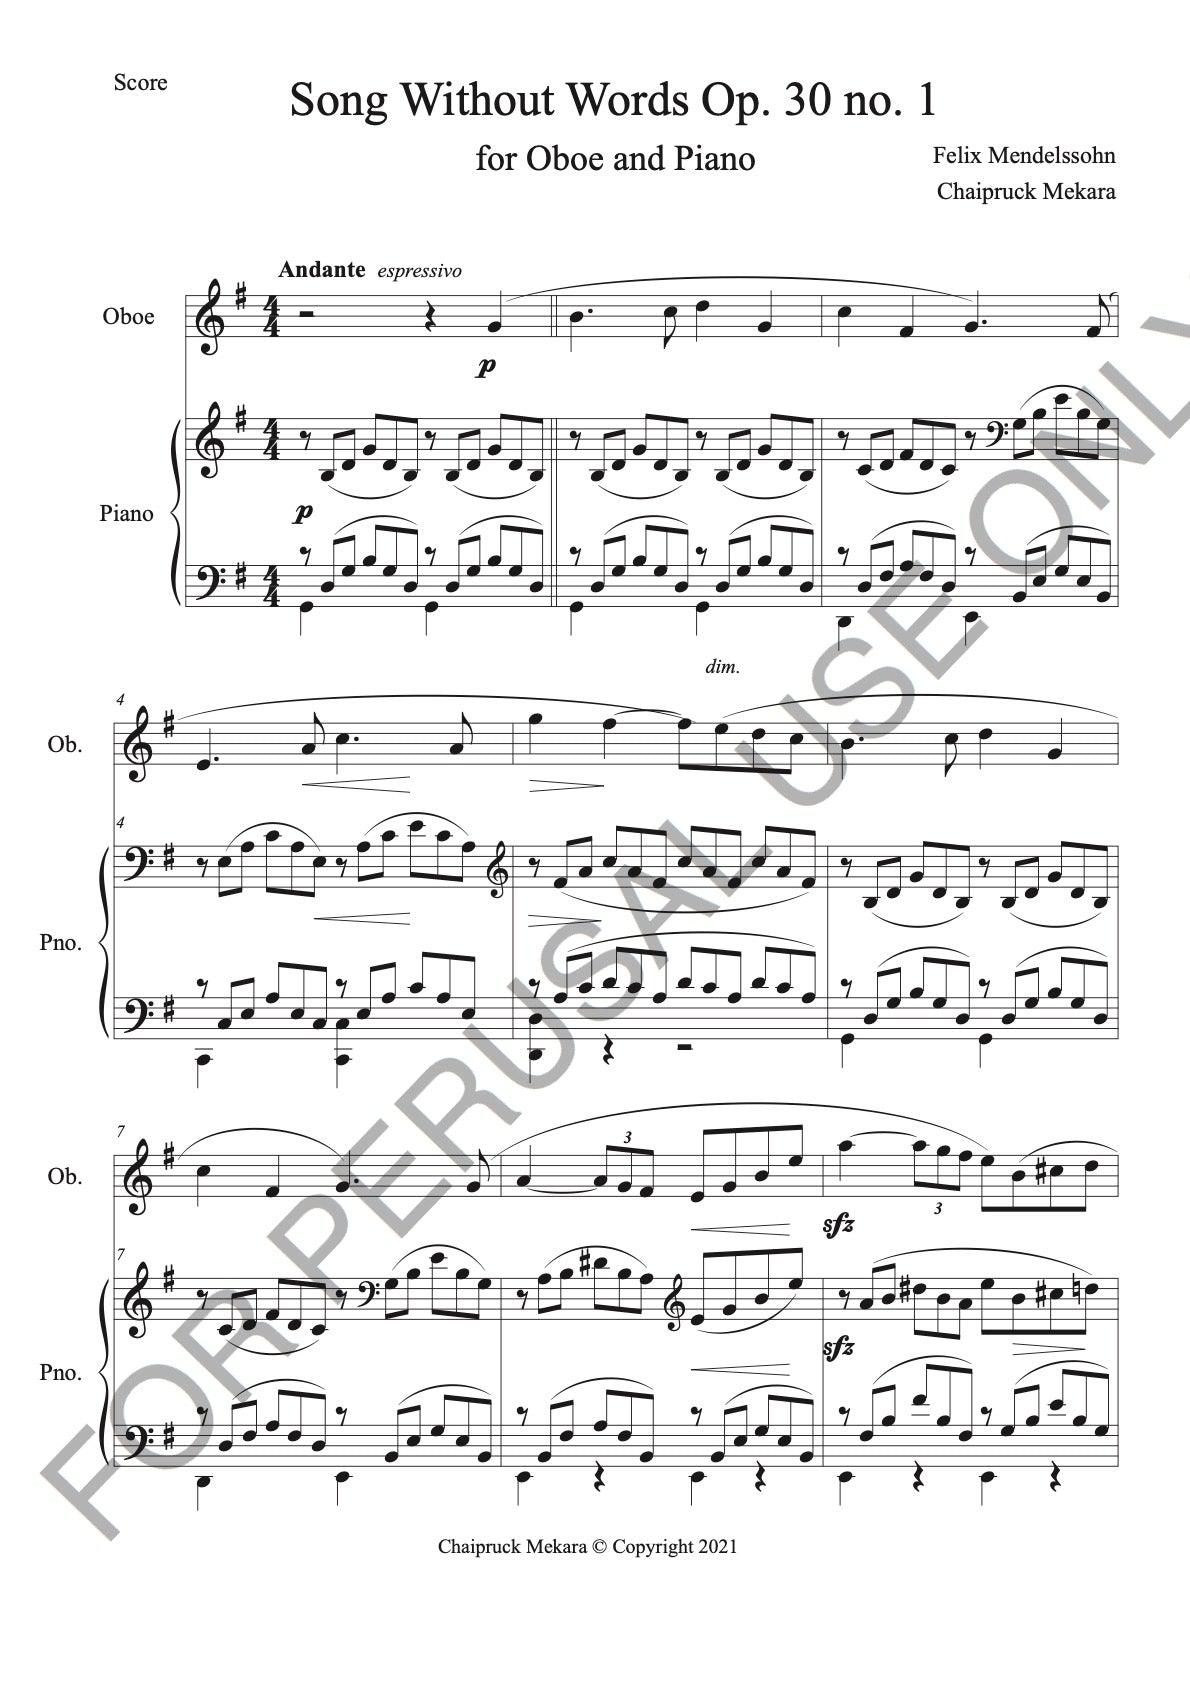 Oboe and Piano sheet music: Songs Without Words Op. 30, no. 1 - ChaipruckMekara